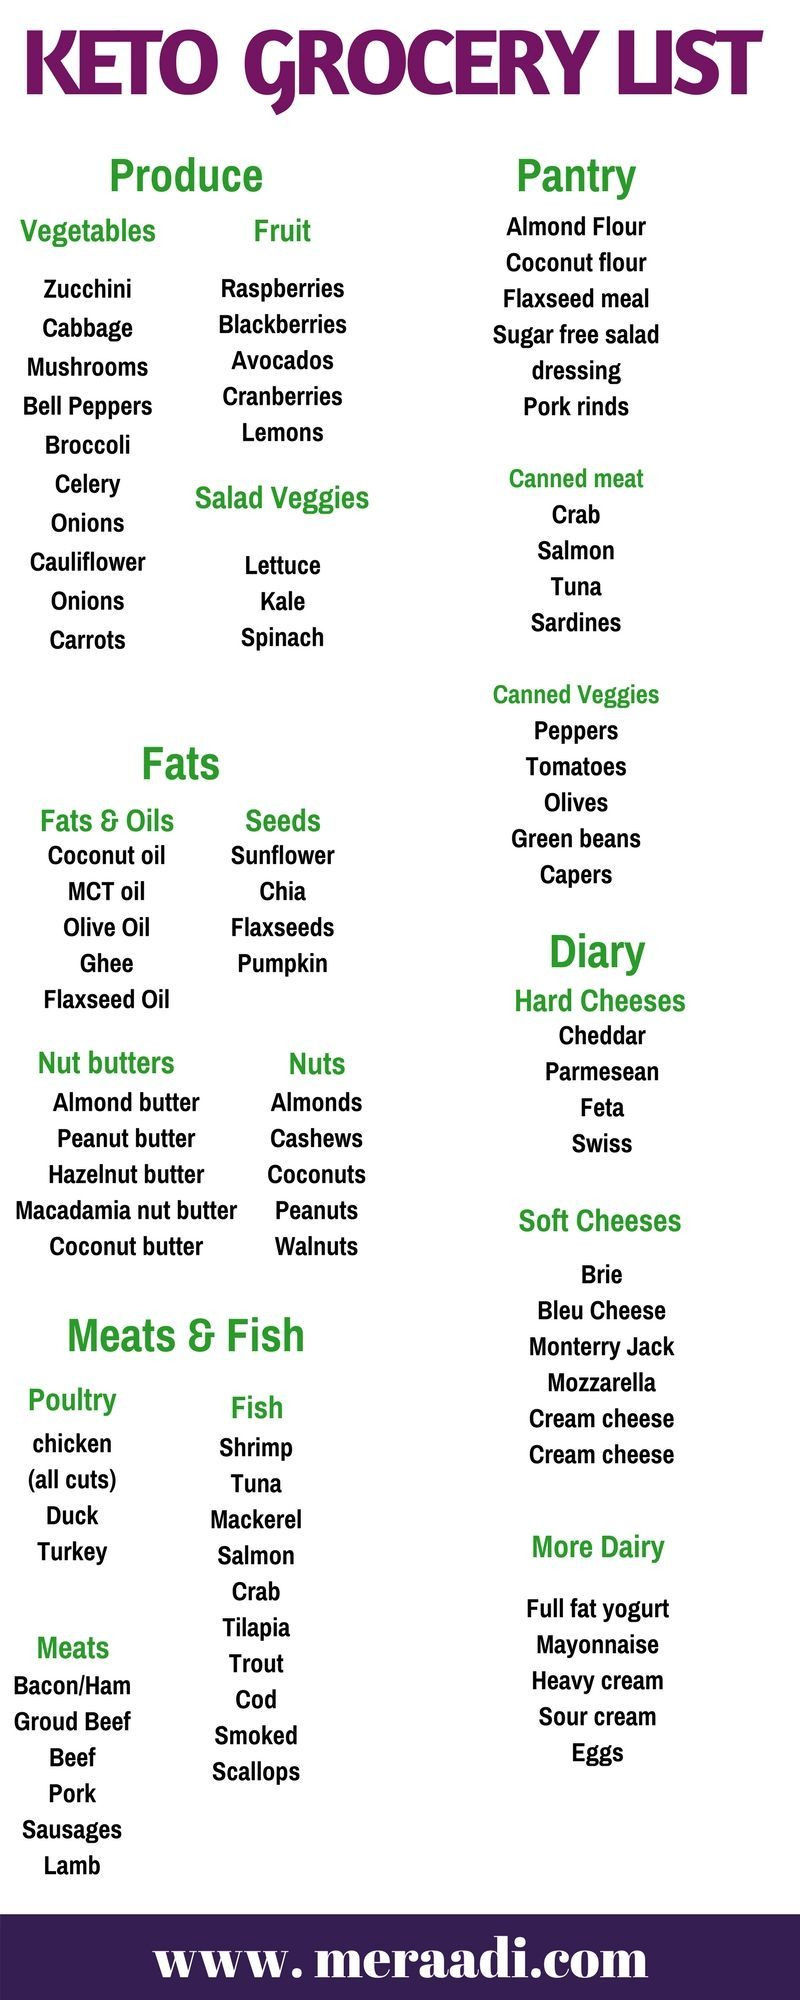 Keto Diet For Beginners Losing Weight Grocery List
 Keto Grocery List 5 Brilliant Ways To Get Into Ketosis